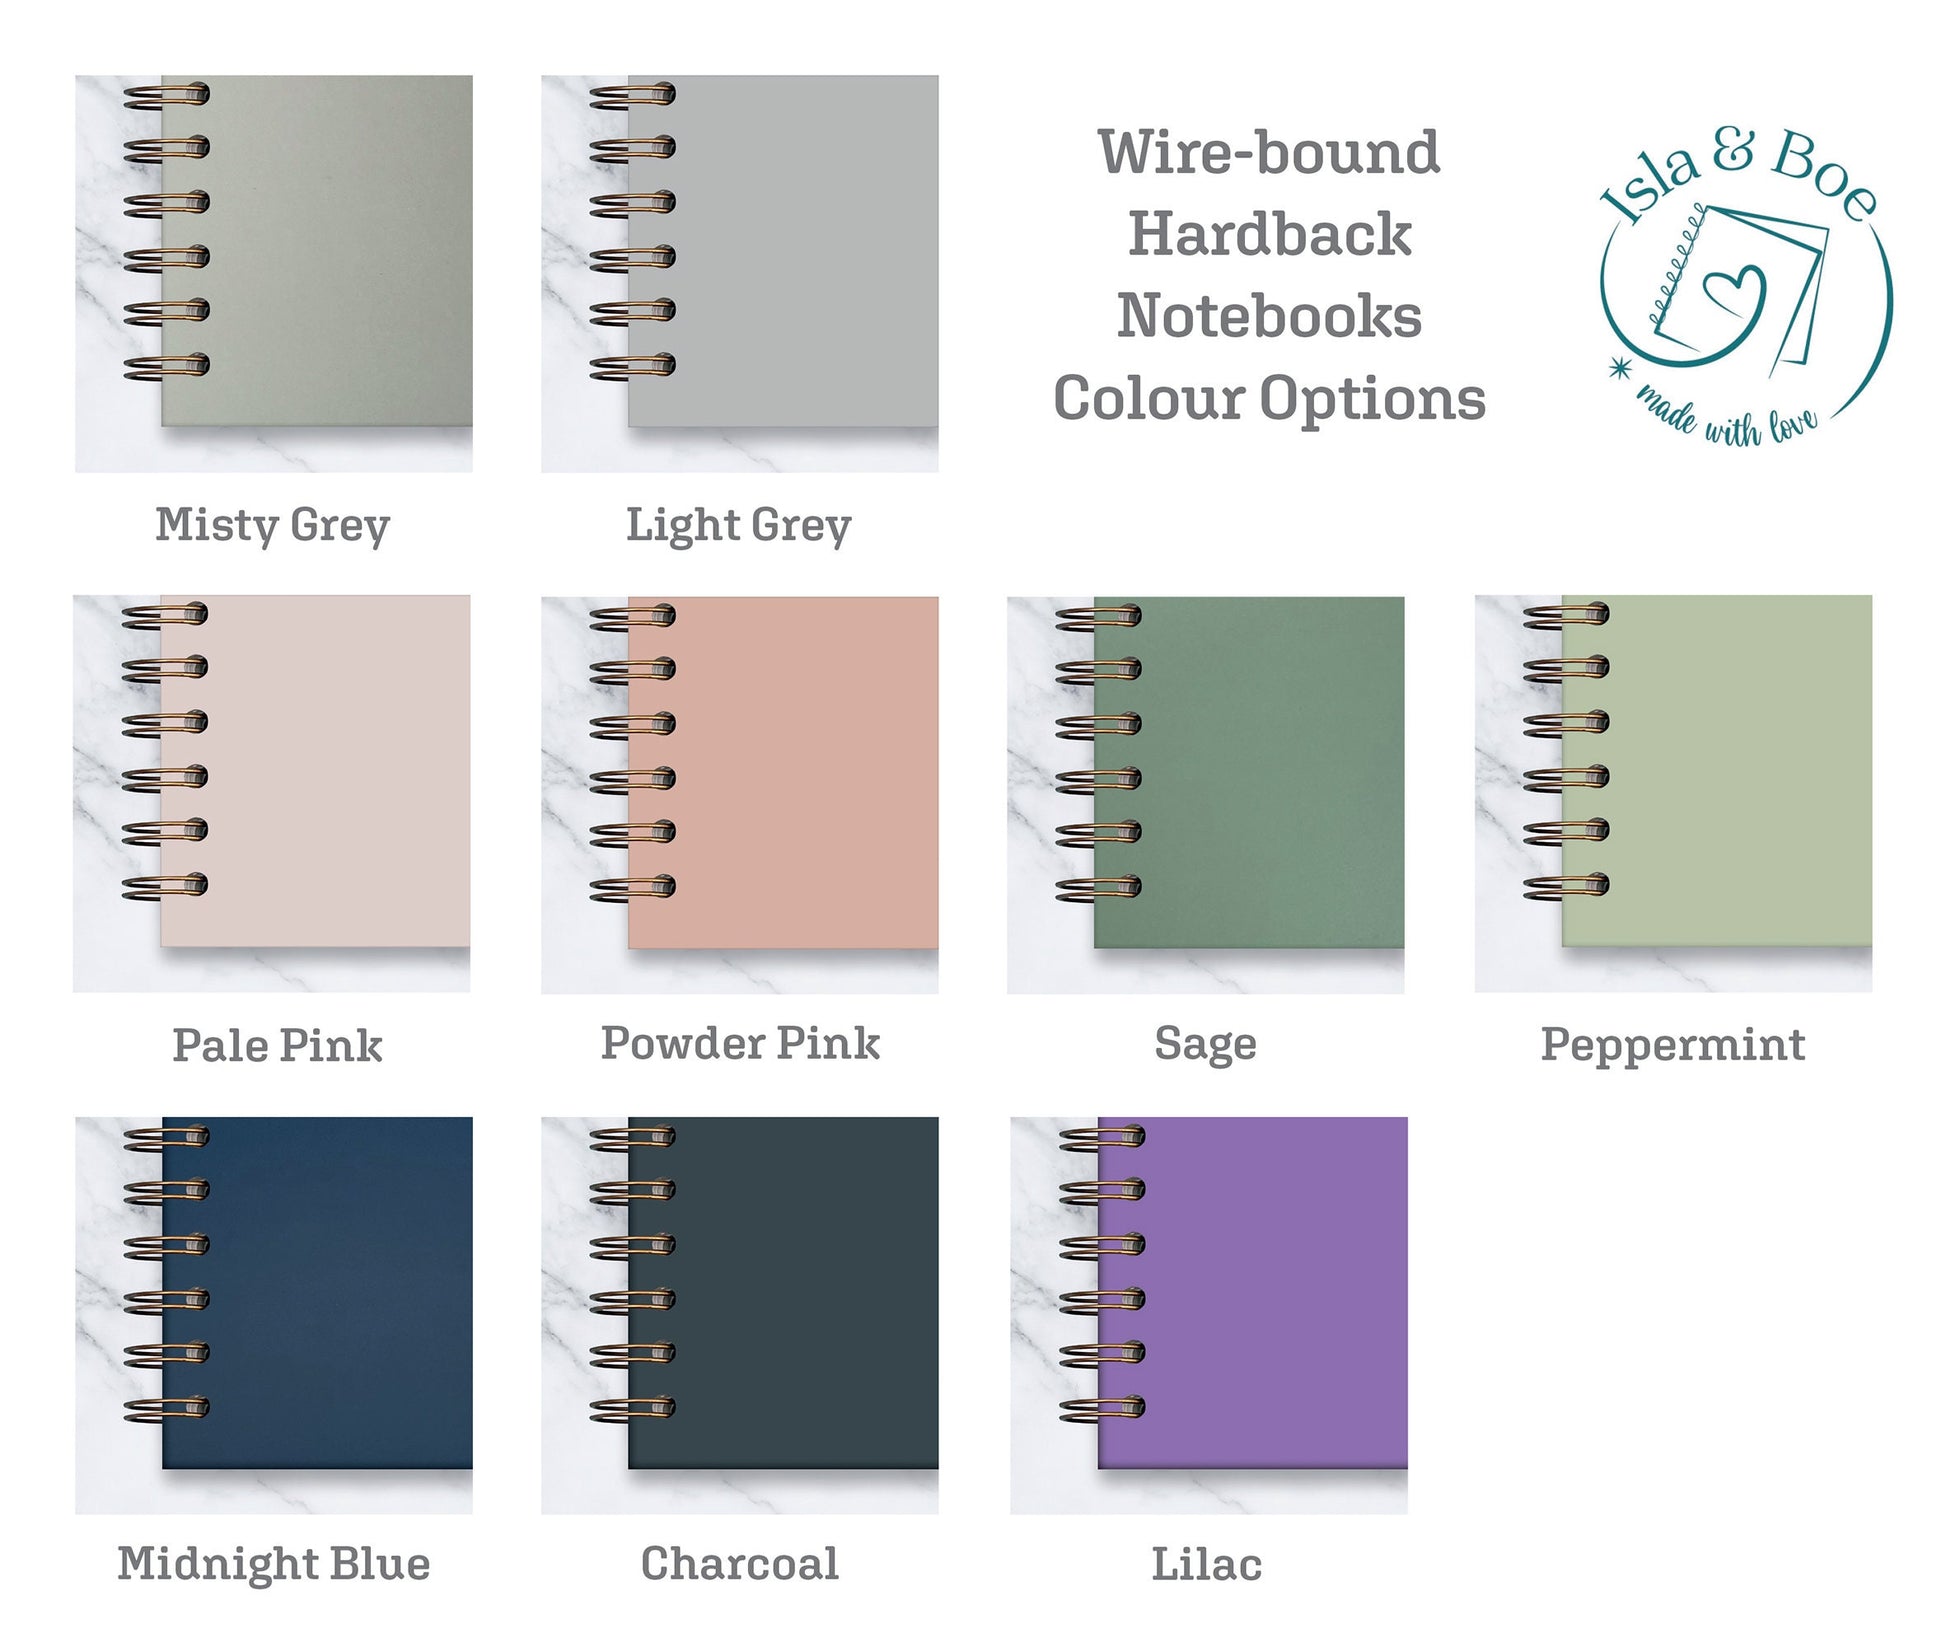 Wireback Notebook colour option swatch. There is Light Grey, Misty Grey, Pale pink, Powder Pink, Sage, Peppermint, Midnight Blue, Charcoal and Lilac.